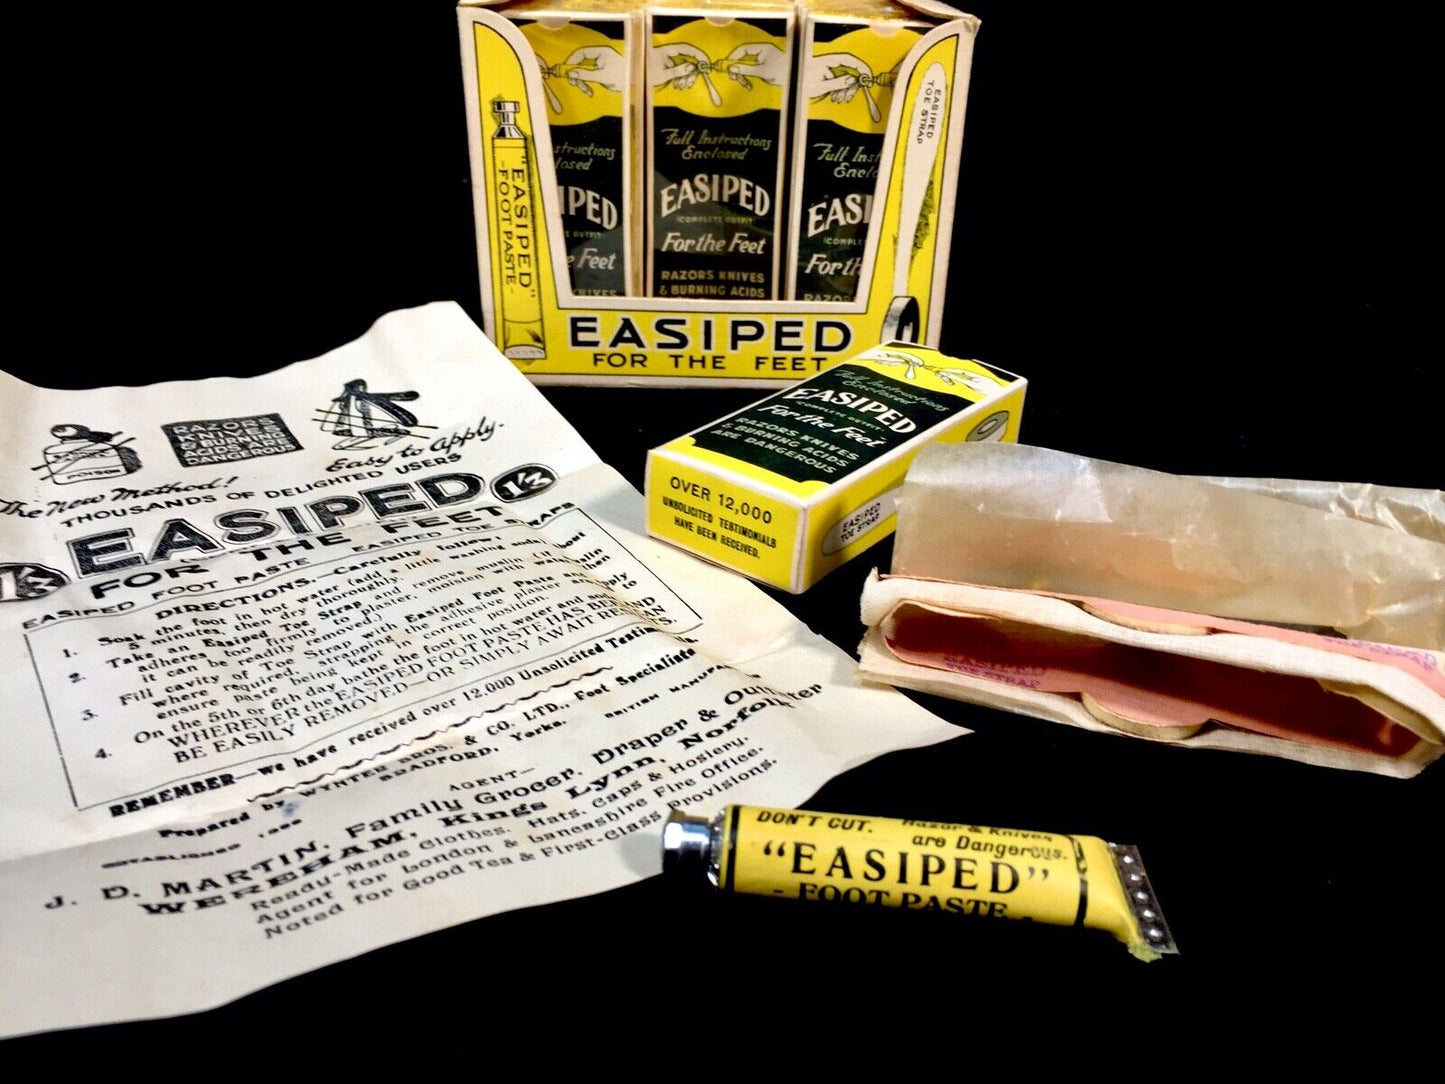 Antique Advertising - Point of Sale Shop Display Box of Easiped Foot Cream